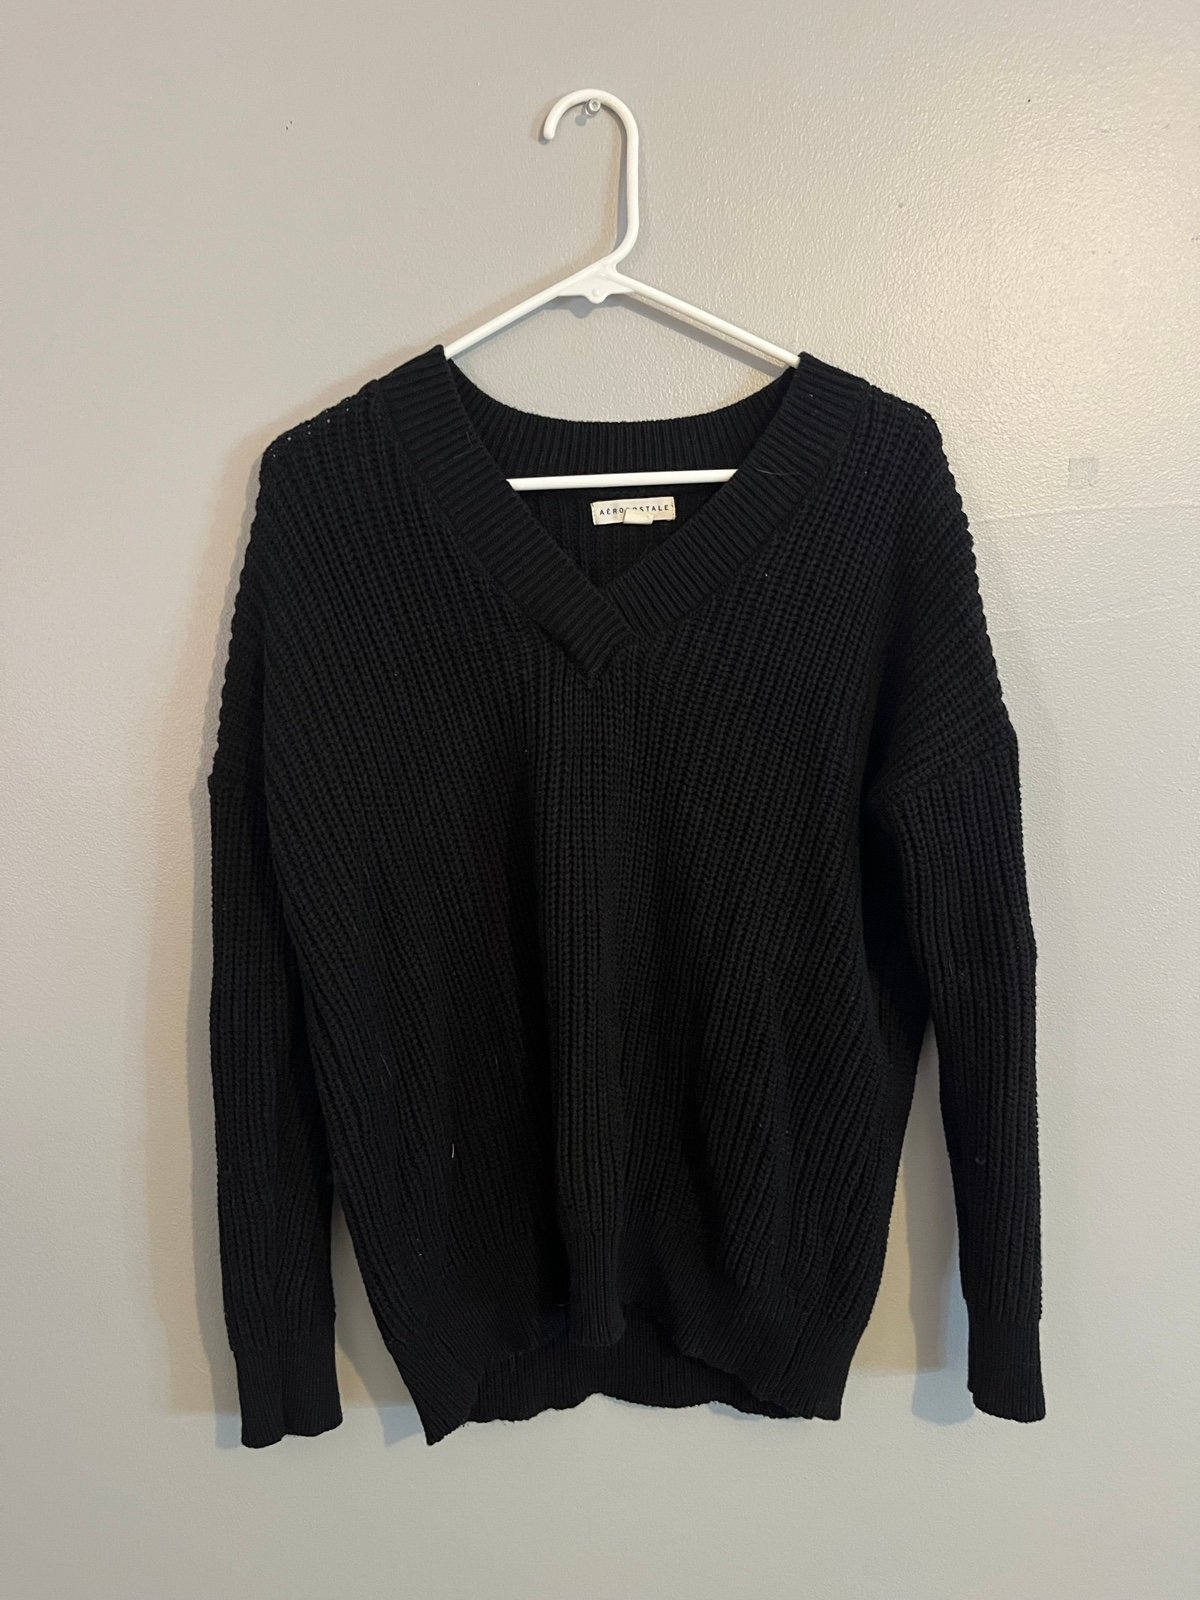 large selection Sweater Kf0LyvnYT well sale